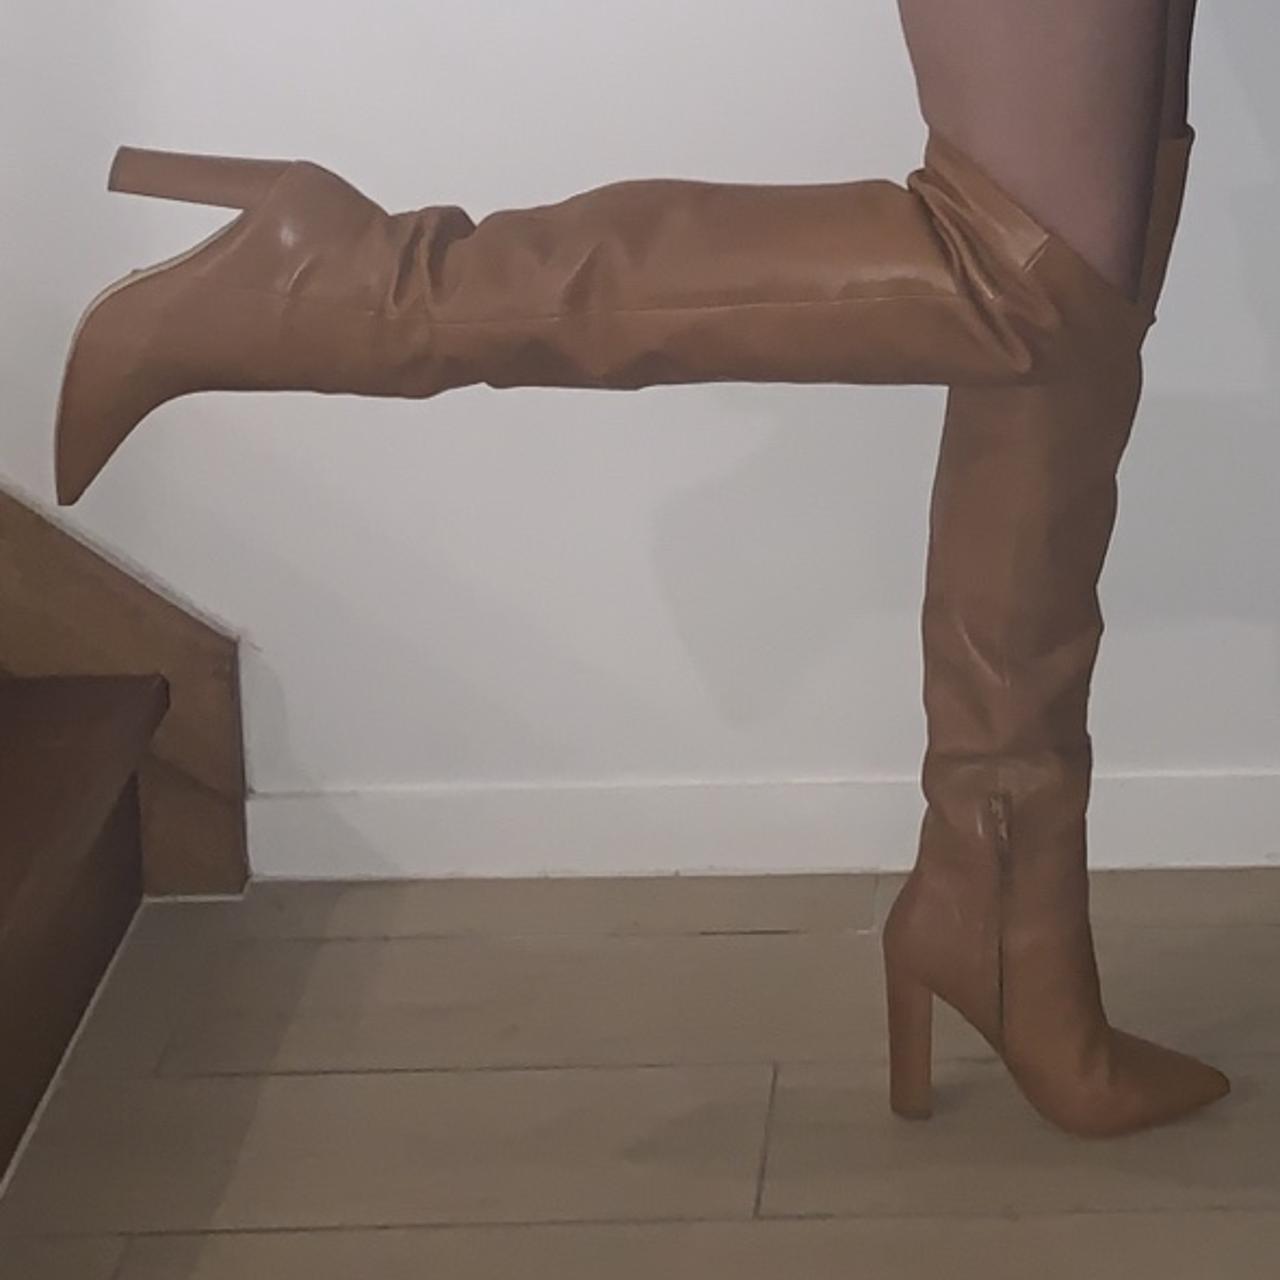 TAN OVER THE KNEE TONY BIANCO LUX BOOT - SIZE... - Depop